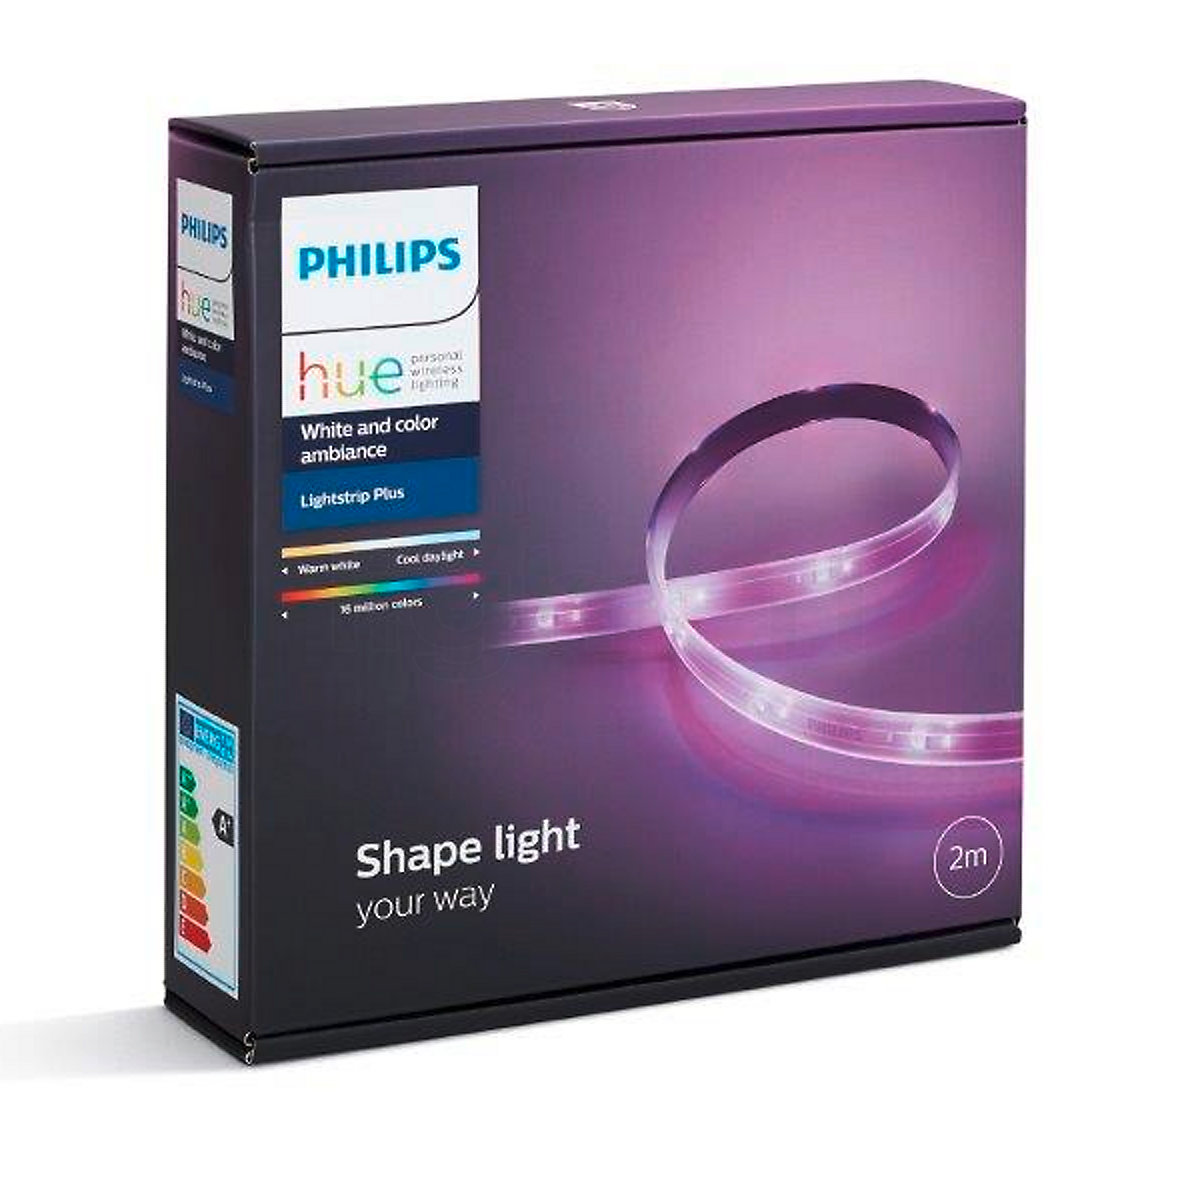 Zielig Premisse ding Philips Hue White and Color Ambiance Lightstrip Plus 2 m LED Base